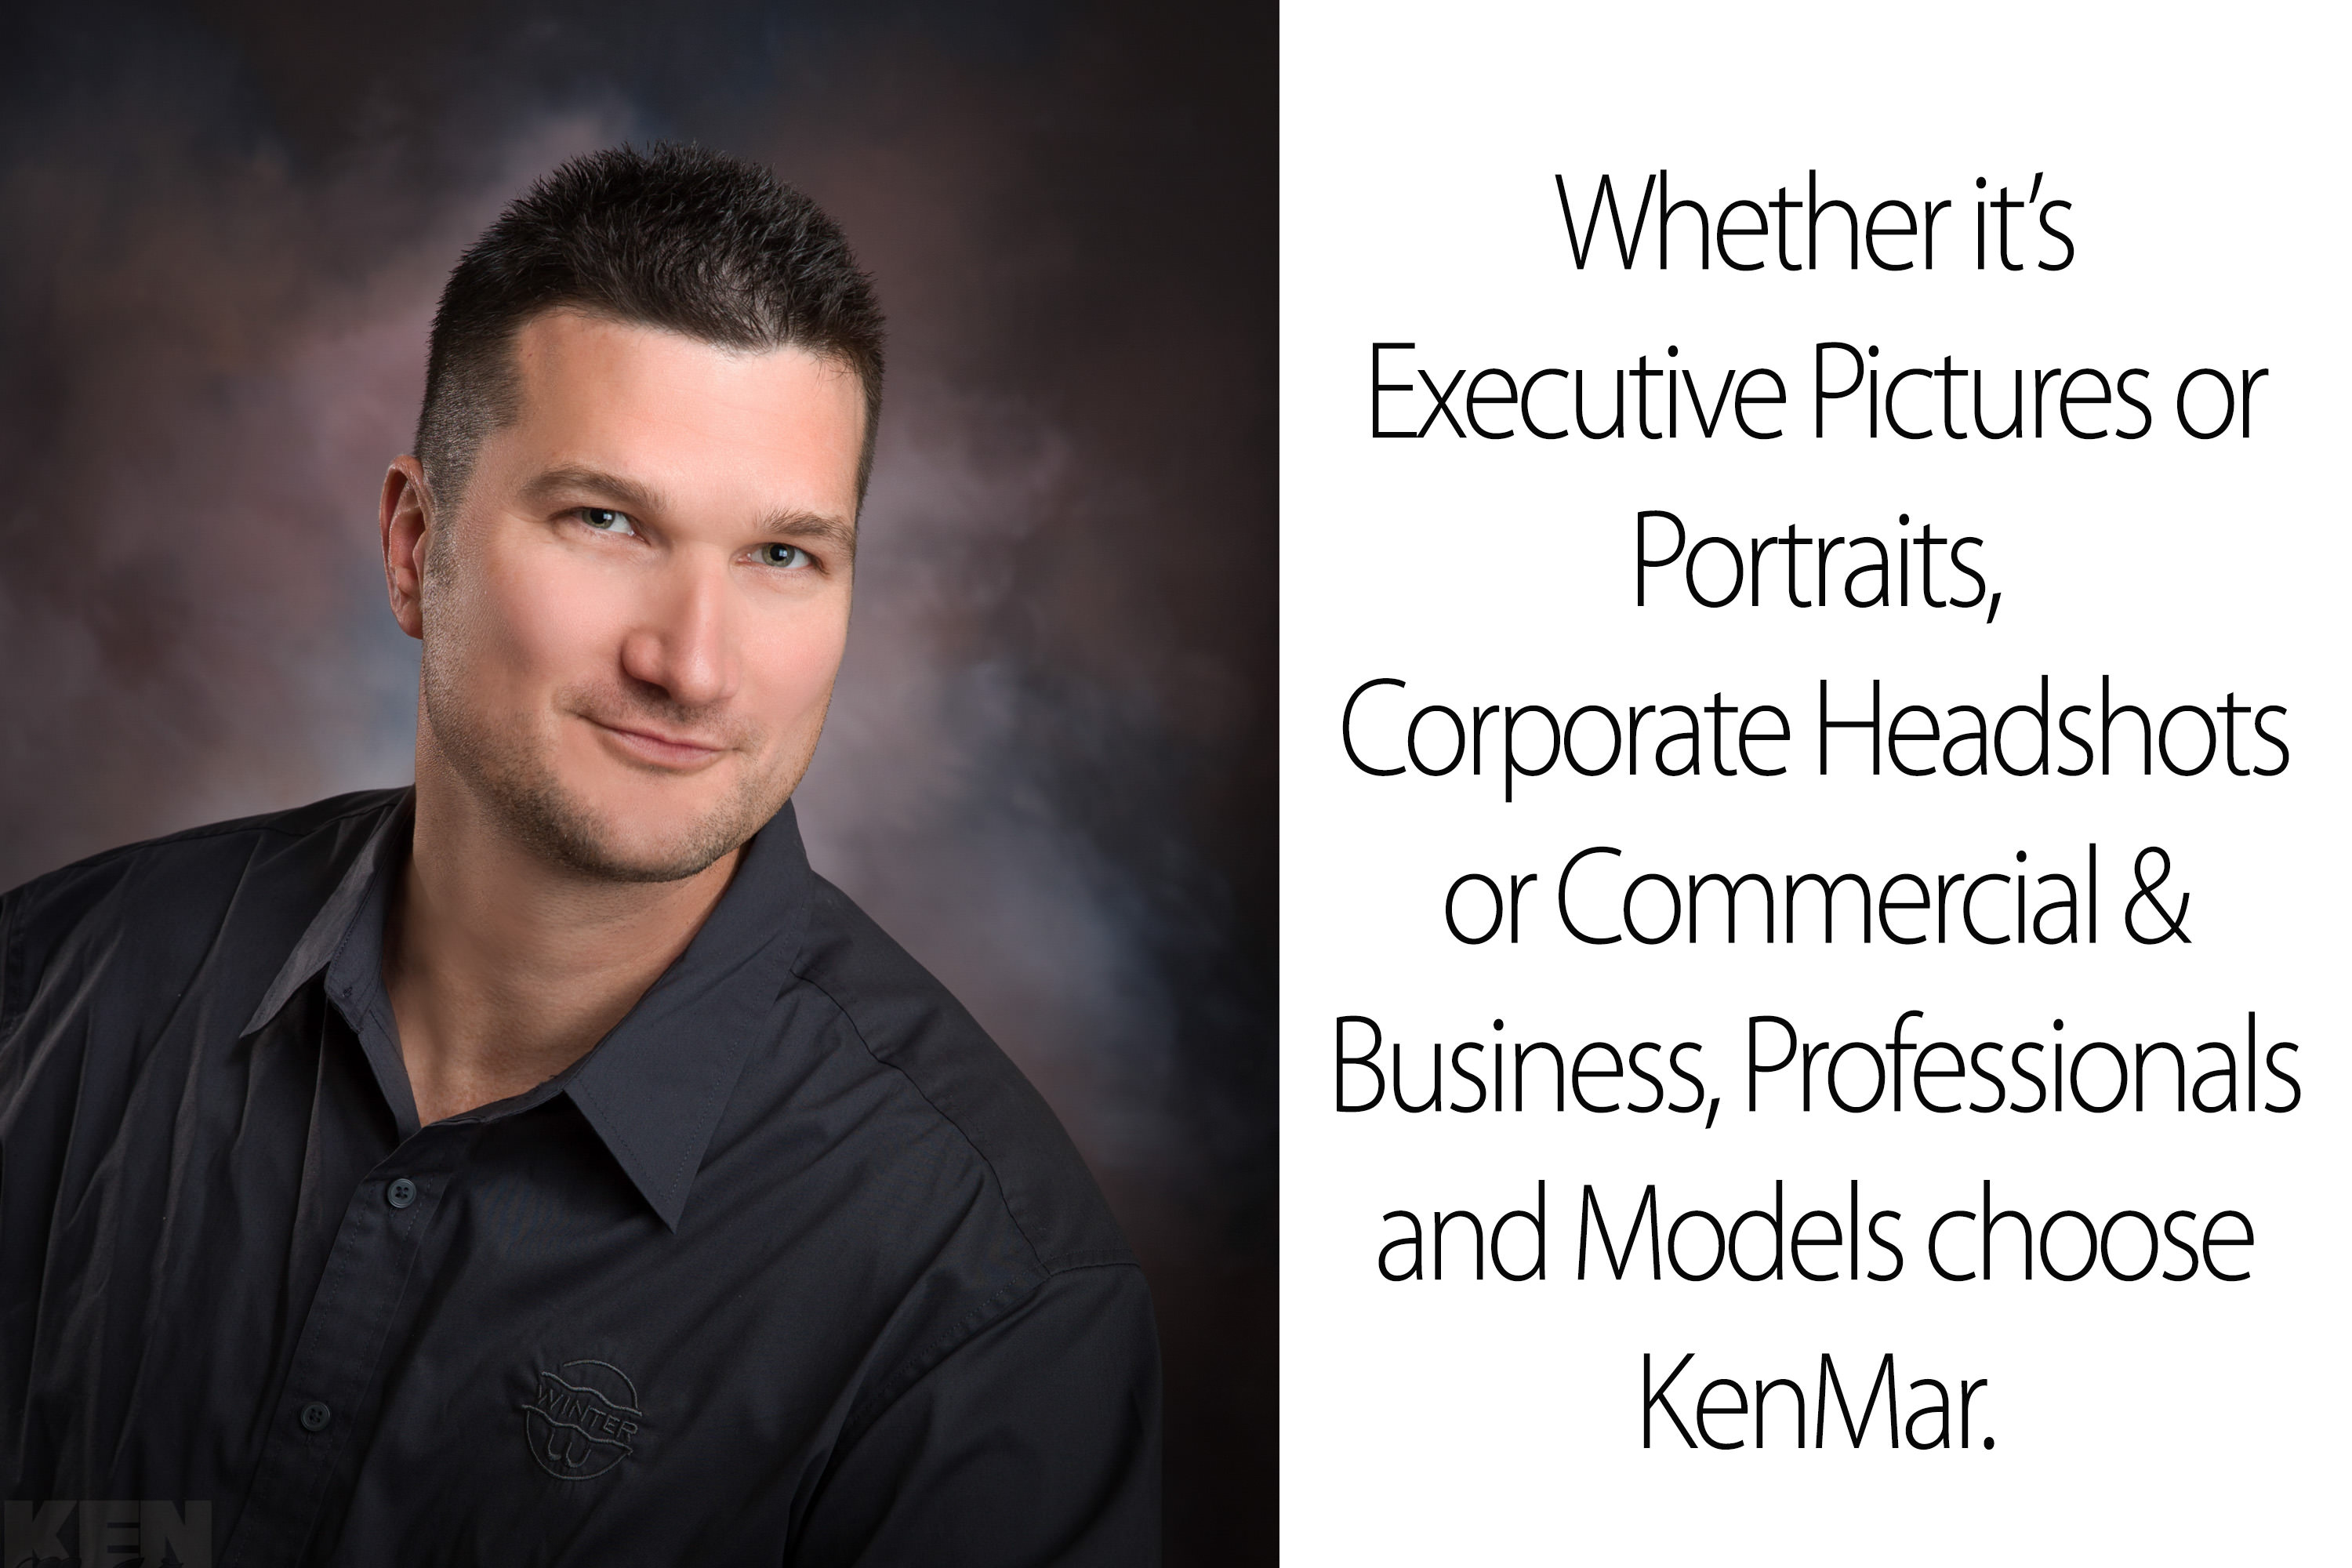 Whether it's Executive Pictures or Portraits, Corporate Headshots or Commercial & Business, Professionals and models choose KenMar